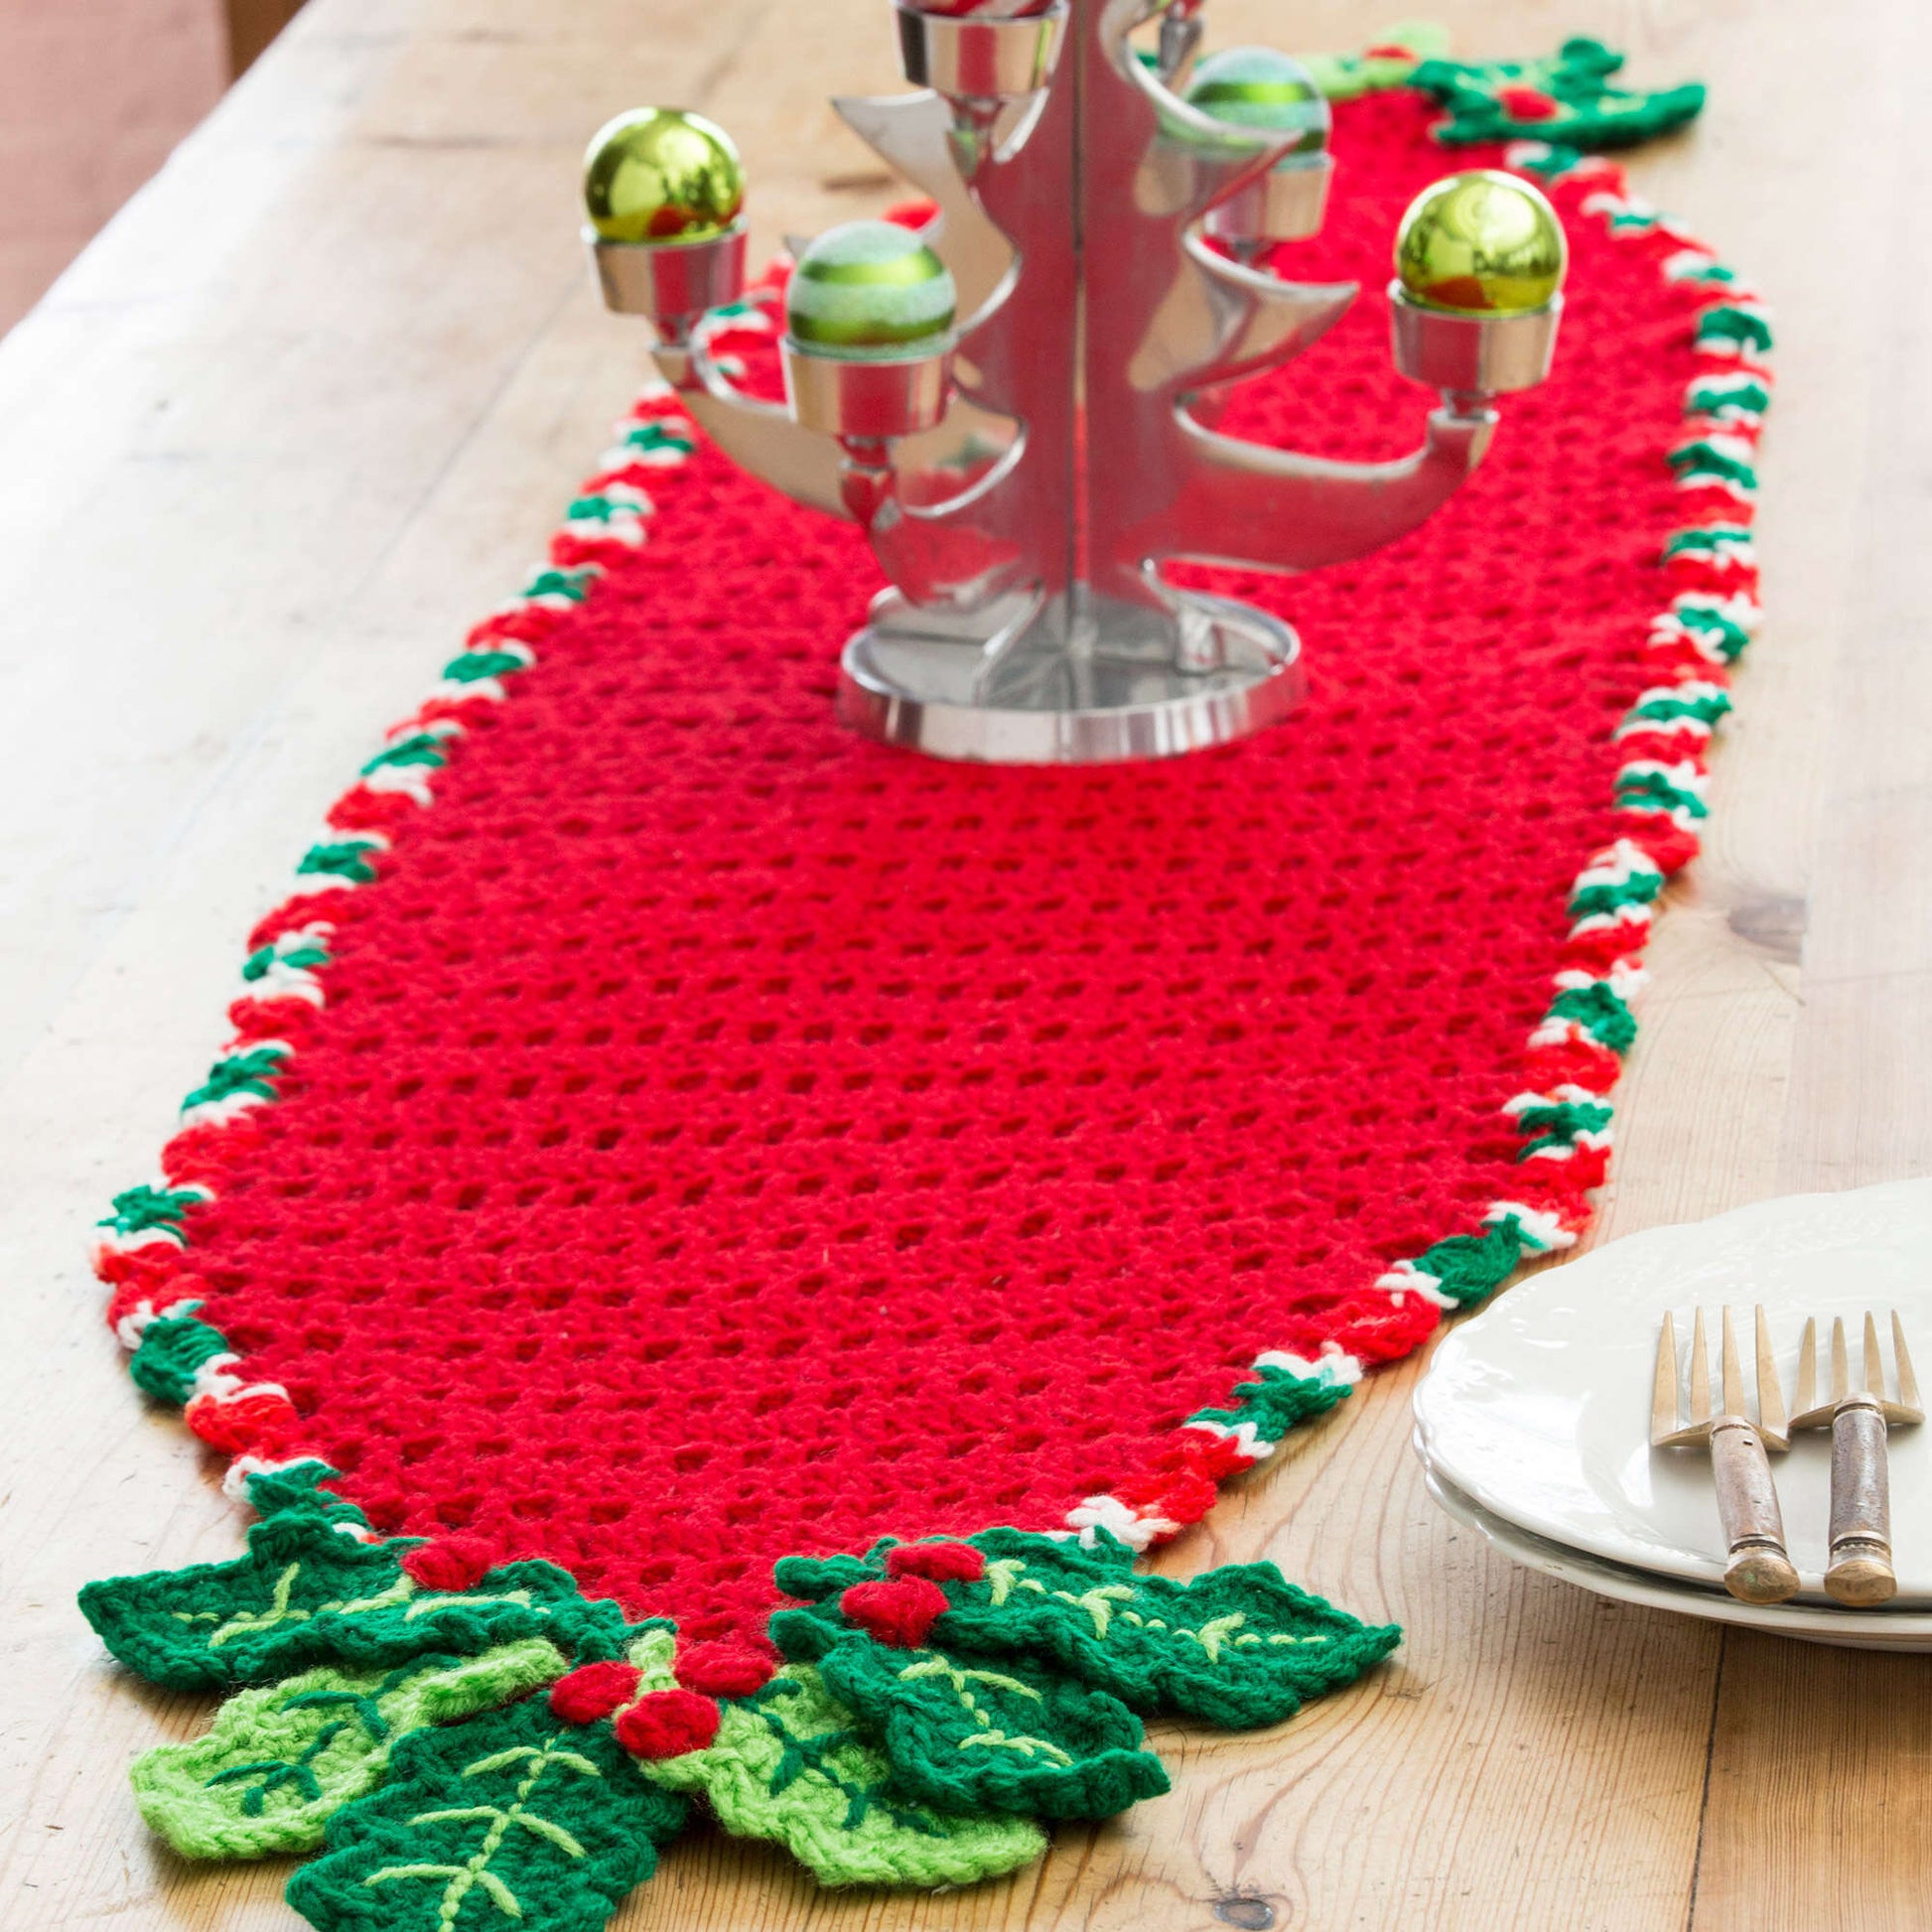 Red Heart Holly Trim Table Runner Red Heart Holly Trim Table Runner